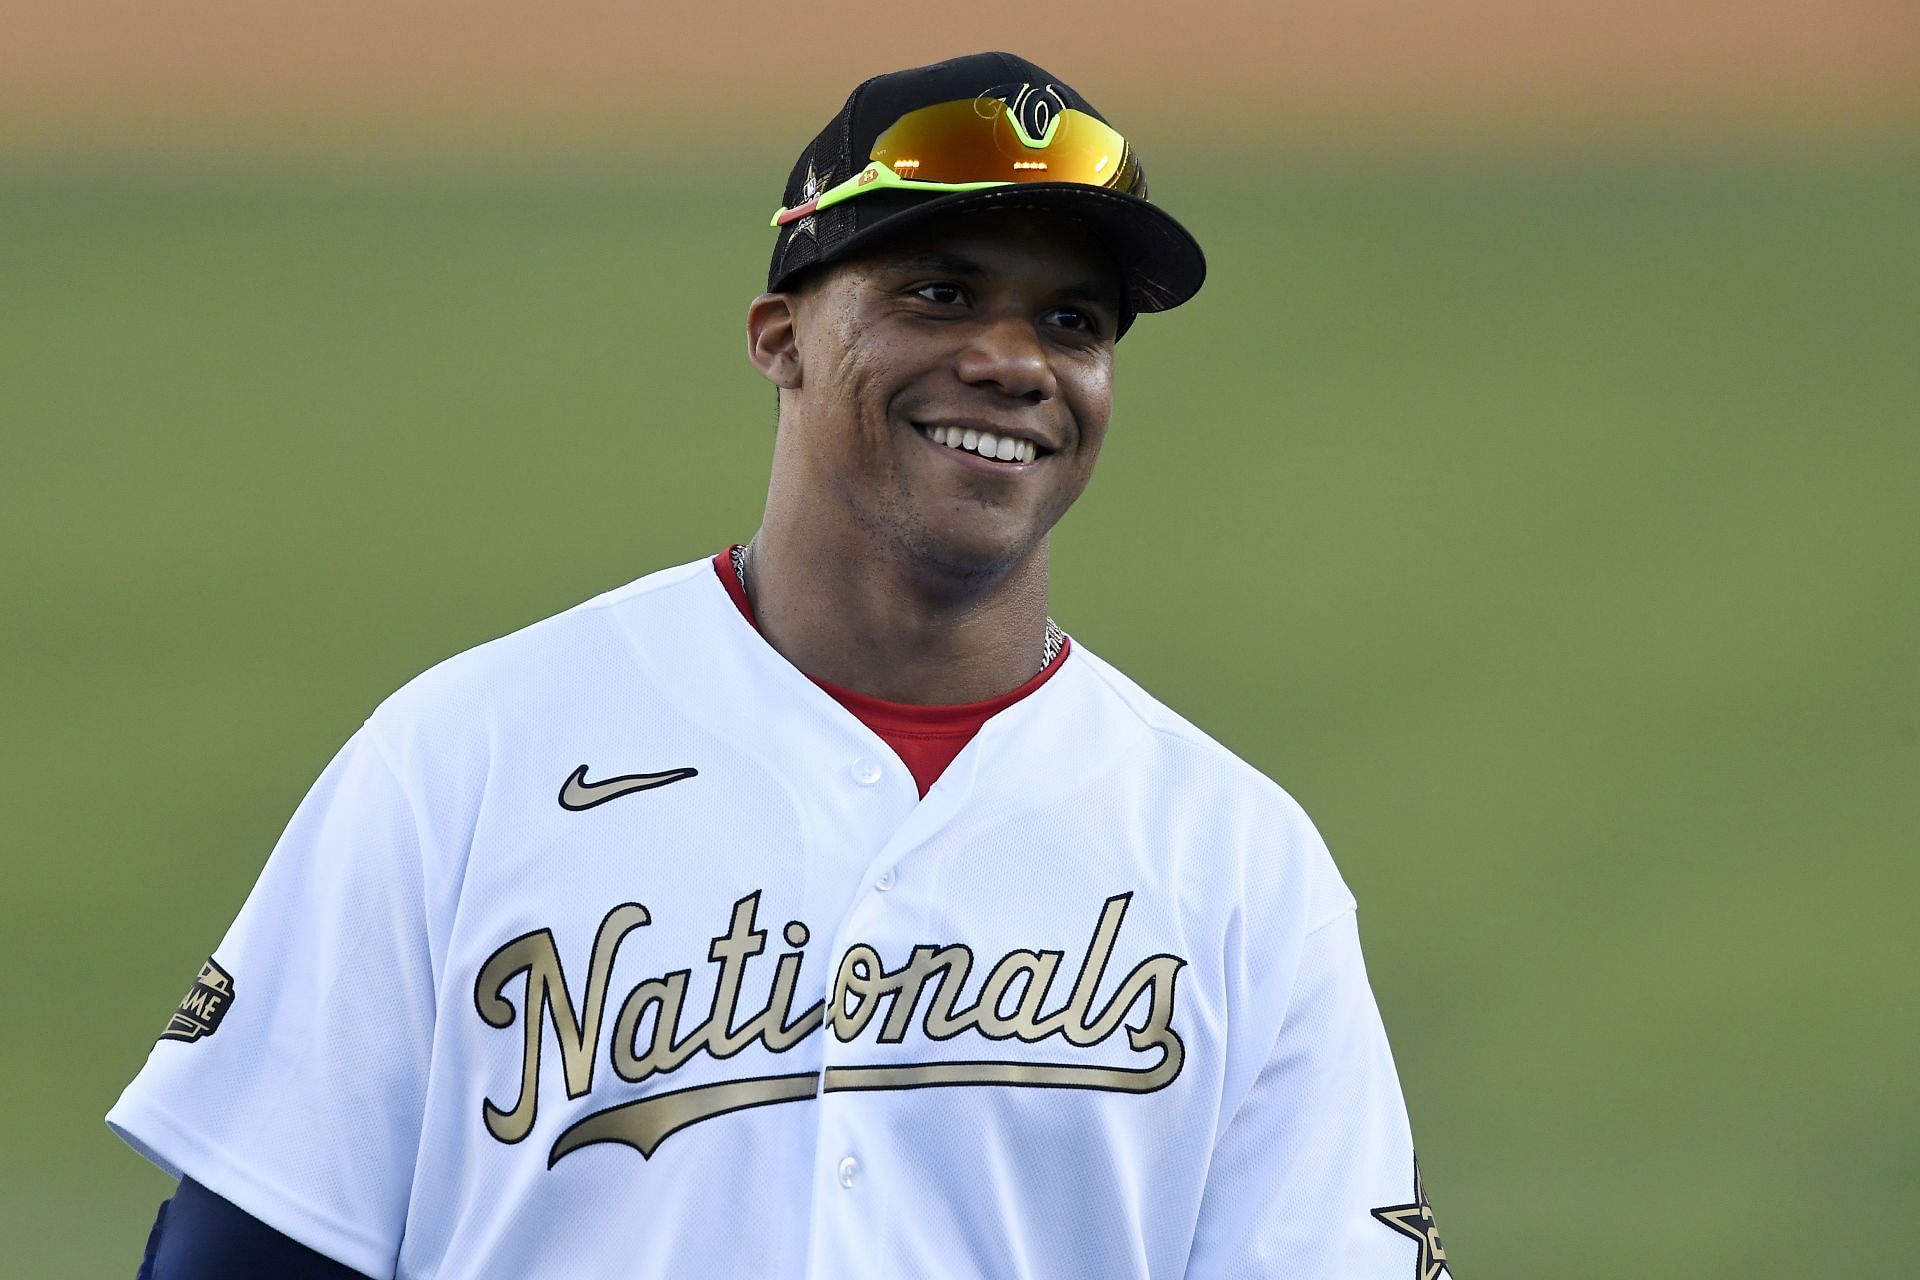 Nationals star Juan Soto reportedly turns down record $440m contract, Washington Nationals